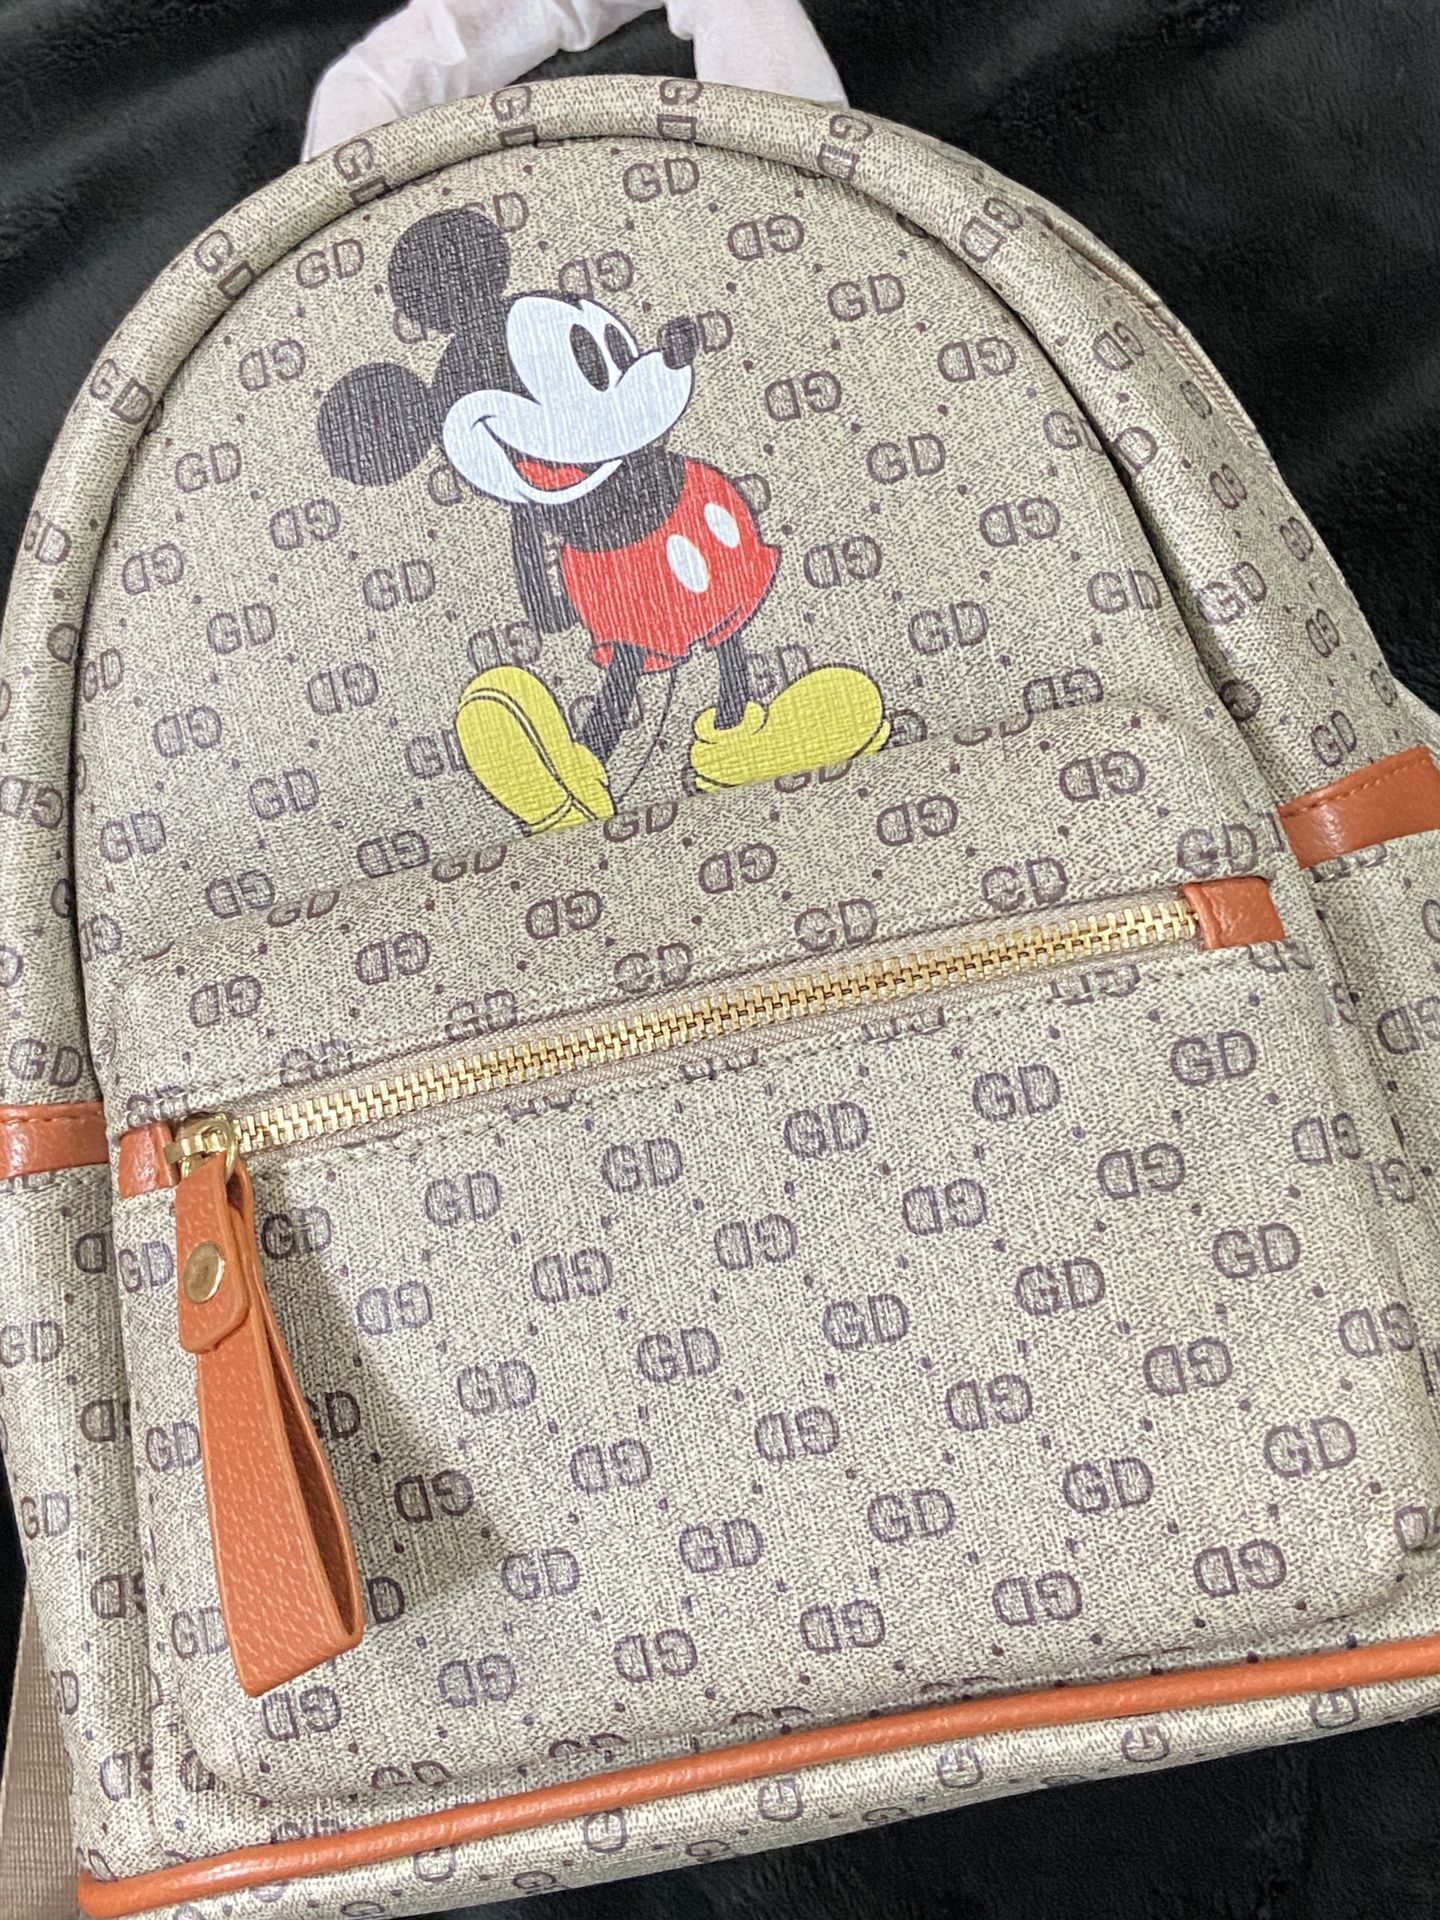 Mickey backpack